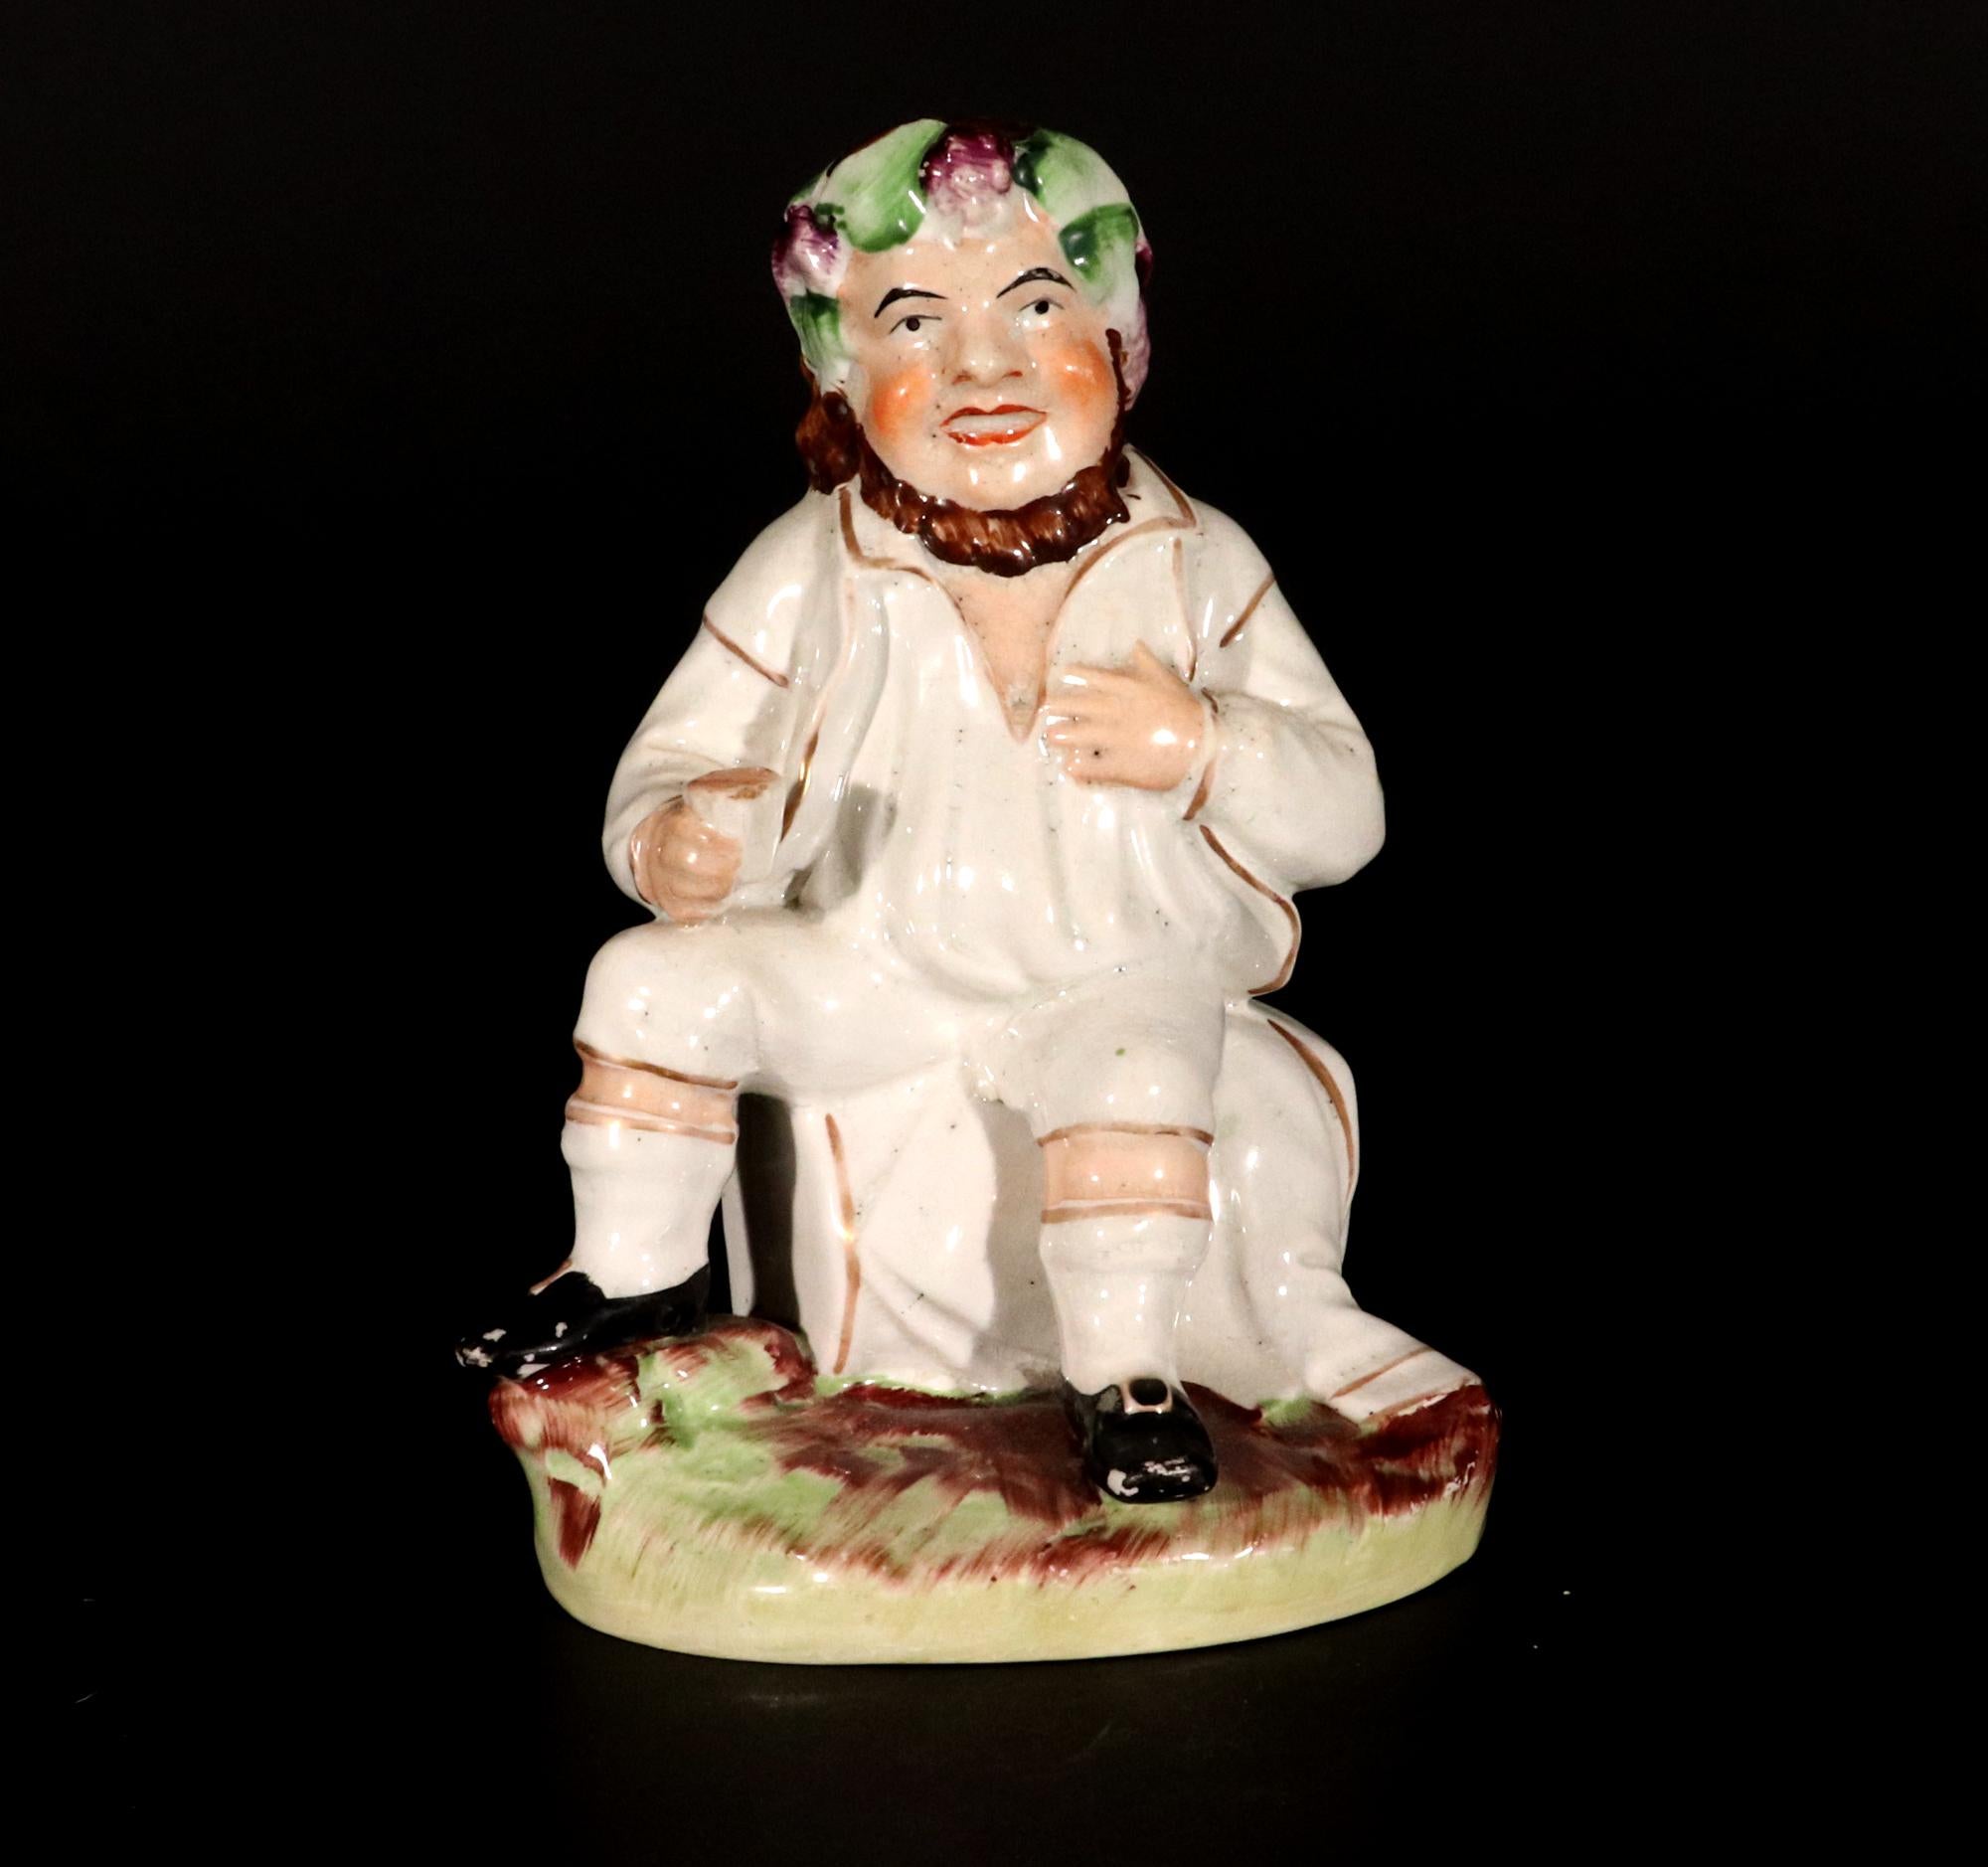 Staffordshire Pottery Figure of Bacchus With Cup on a Wine Barrel,
19th Century

The charming figure depicts the figure of Bacchus with a grape and leaf wreath around his head sitting on a wine barrel with his right left raised on a grassy mound. 